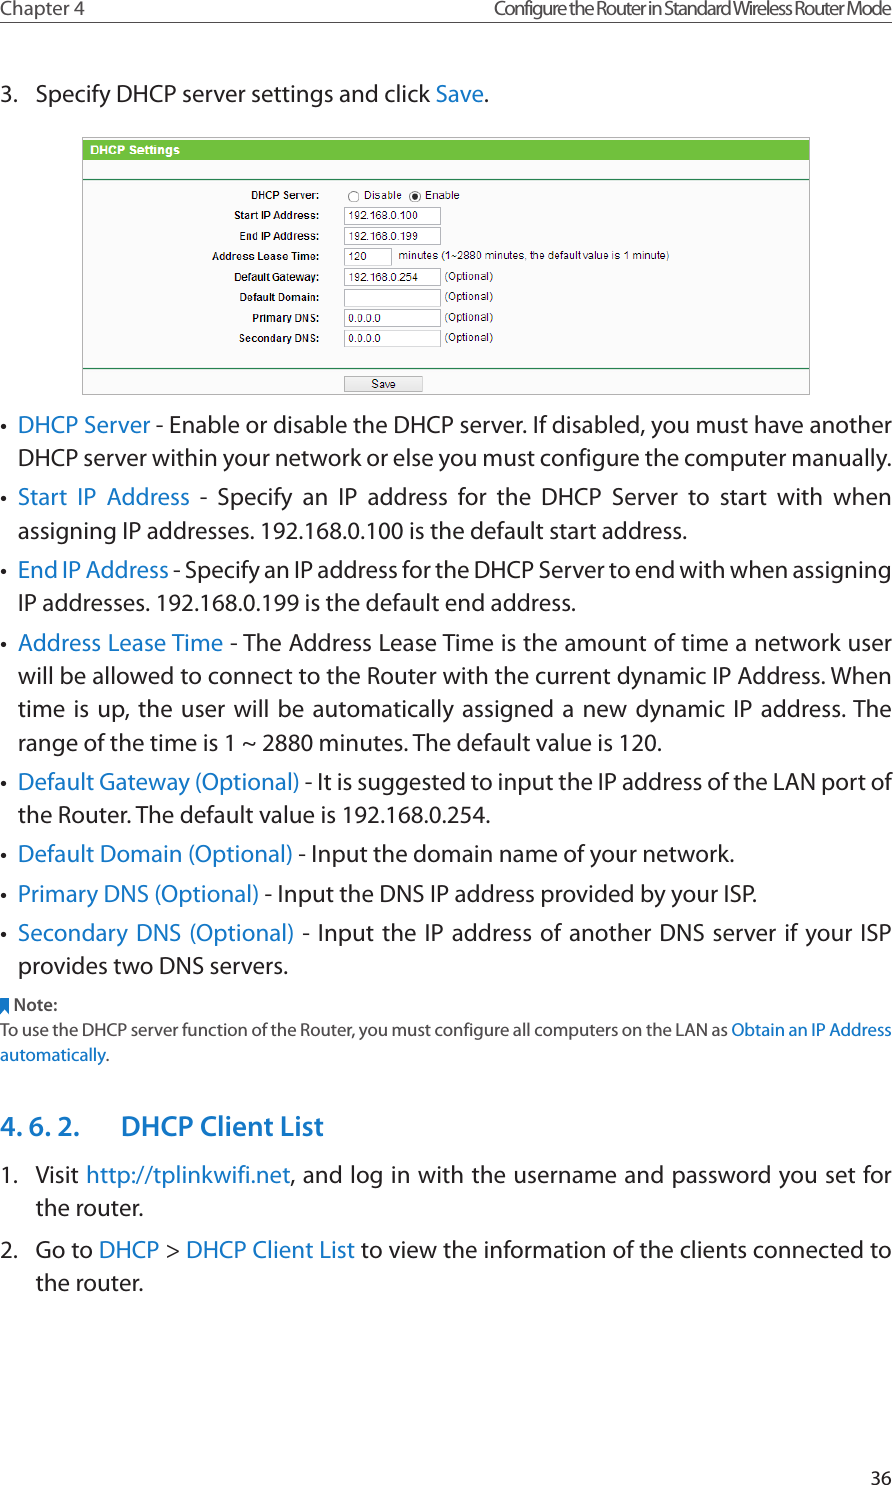 36Chapter 4 Configure the Router in Standard Wireless Router Mode3.  Specify DHCP server settings and click Save.•  DHCP Server - Enable or disable the DHCP server. If disabled, you must have another DHCP server within your network or else you must configure the computer manually.•  Start IP Address - Specify an IP address for the DHCP Server to start with when assigning IP addresses. 192.168.0.100 is the default start address.•  End IP Address - Specify an IP address for the DHCP Server to end with when assigning IP addresses. 192.168.0.199 is the default end address.•  Address Lease Time - The Address Lease Time is the amount of time a network user will be allowed to connect to the Router with the current dynamic IP Address. When time is up, the user will be automatically assigned a new dynamic IP address. The range of the time is 1 ~ 2880 minutes. The default value is 120.•  Default Gateway (Optional) - It is suggested to input the IP address of the LAN port of the Router. The default value is 192.168.0.254.•  Default Domain (Optional) - Input the domain name of your network.•  Primary DNS (Optional) - Input the DNS IP address provided by your ISP.•  Secondary DNS (Optional) - Input the IP address of another DNS server if your ISP provides two DNS servers.Note:To use the DHCP server function of the Router, you must configure all computers on the LAN as Obtain an IP Address automatically.4. 6. 2.  DHCP Client List1.  Visit http://tplinkwifi.net, and log in with the username and password you set for the router.2.  Go to DHCP &gt; DHCP Client List to view the information of the clients connected to the router.